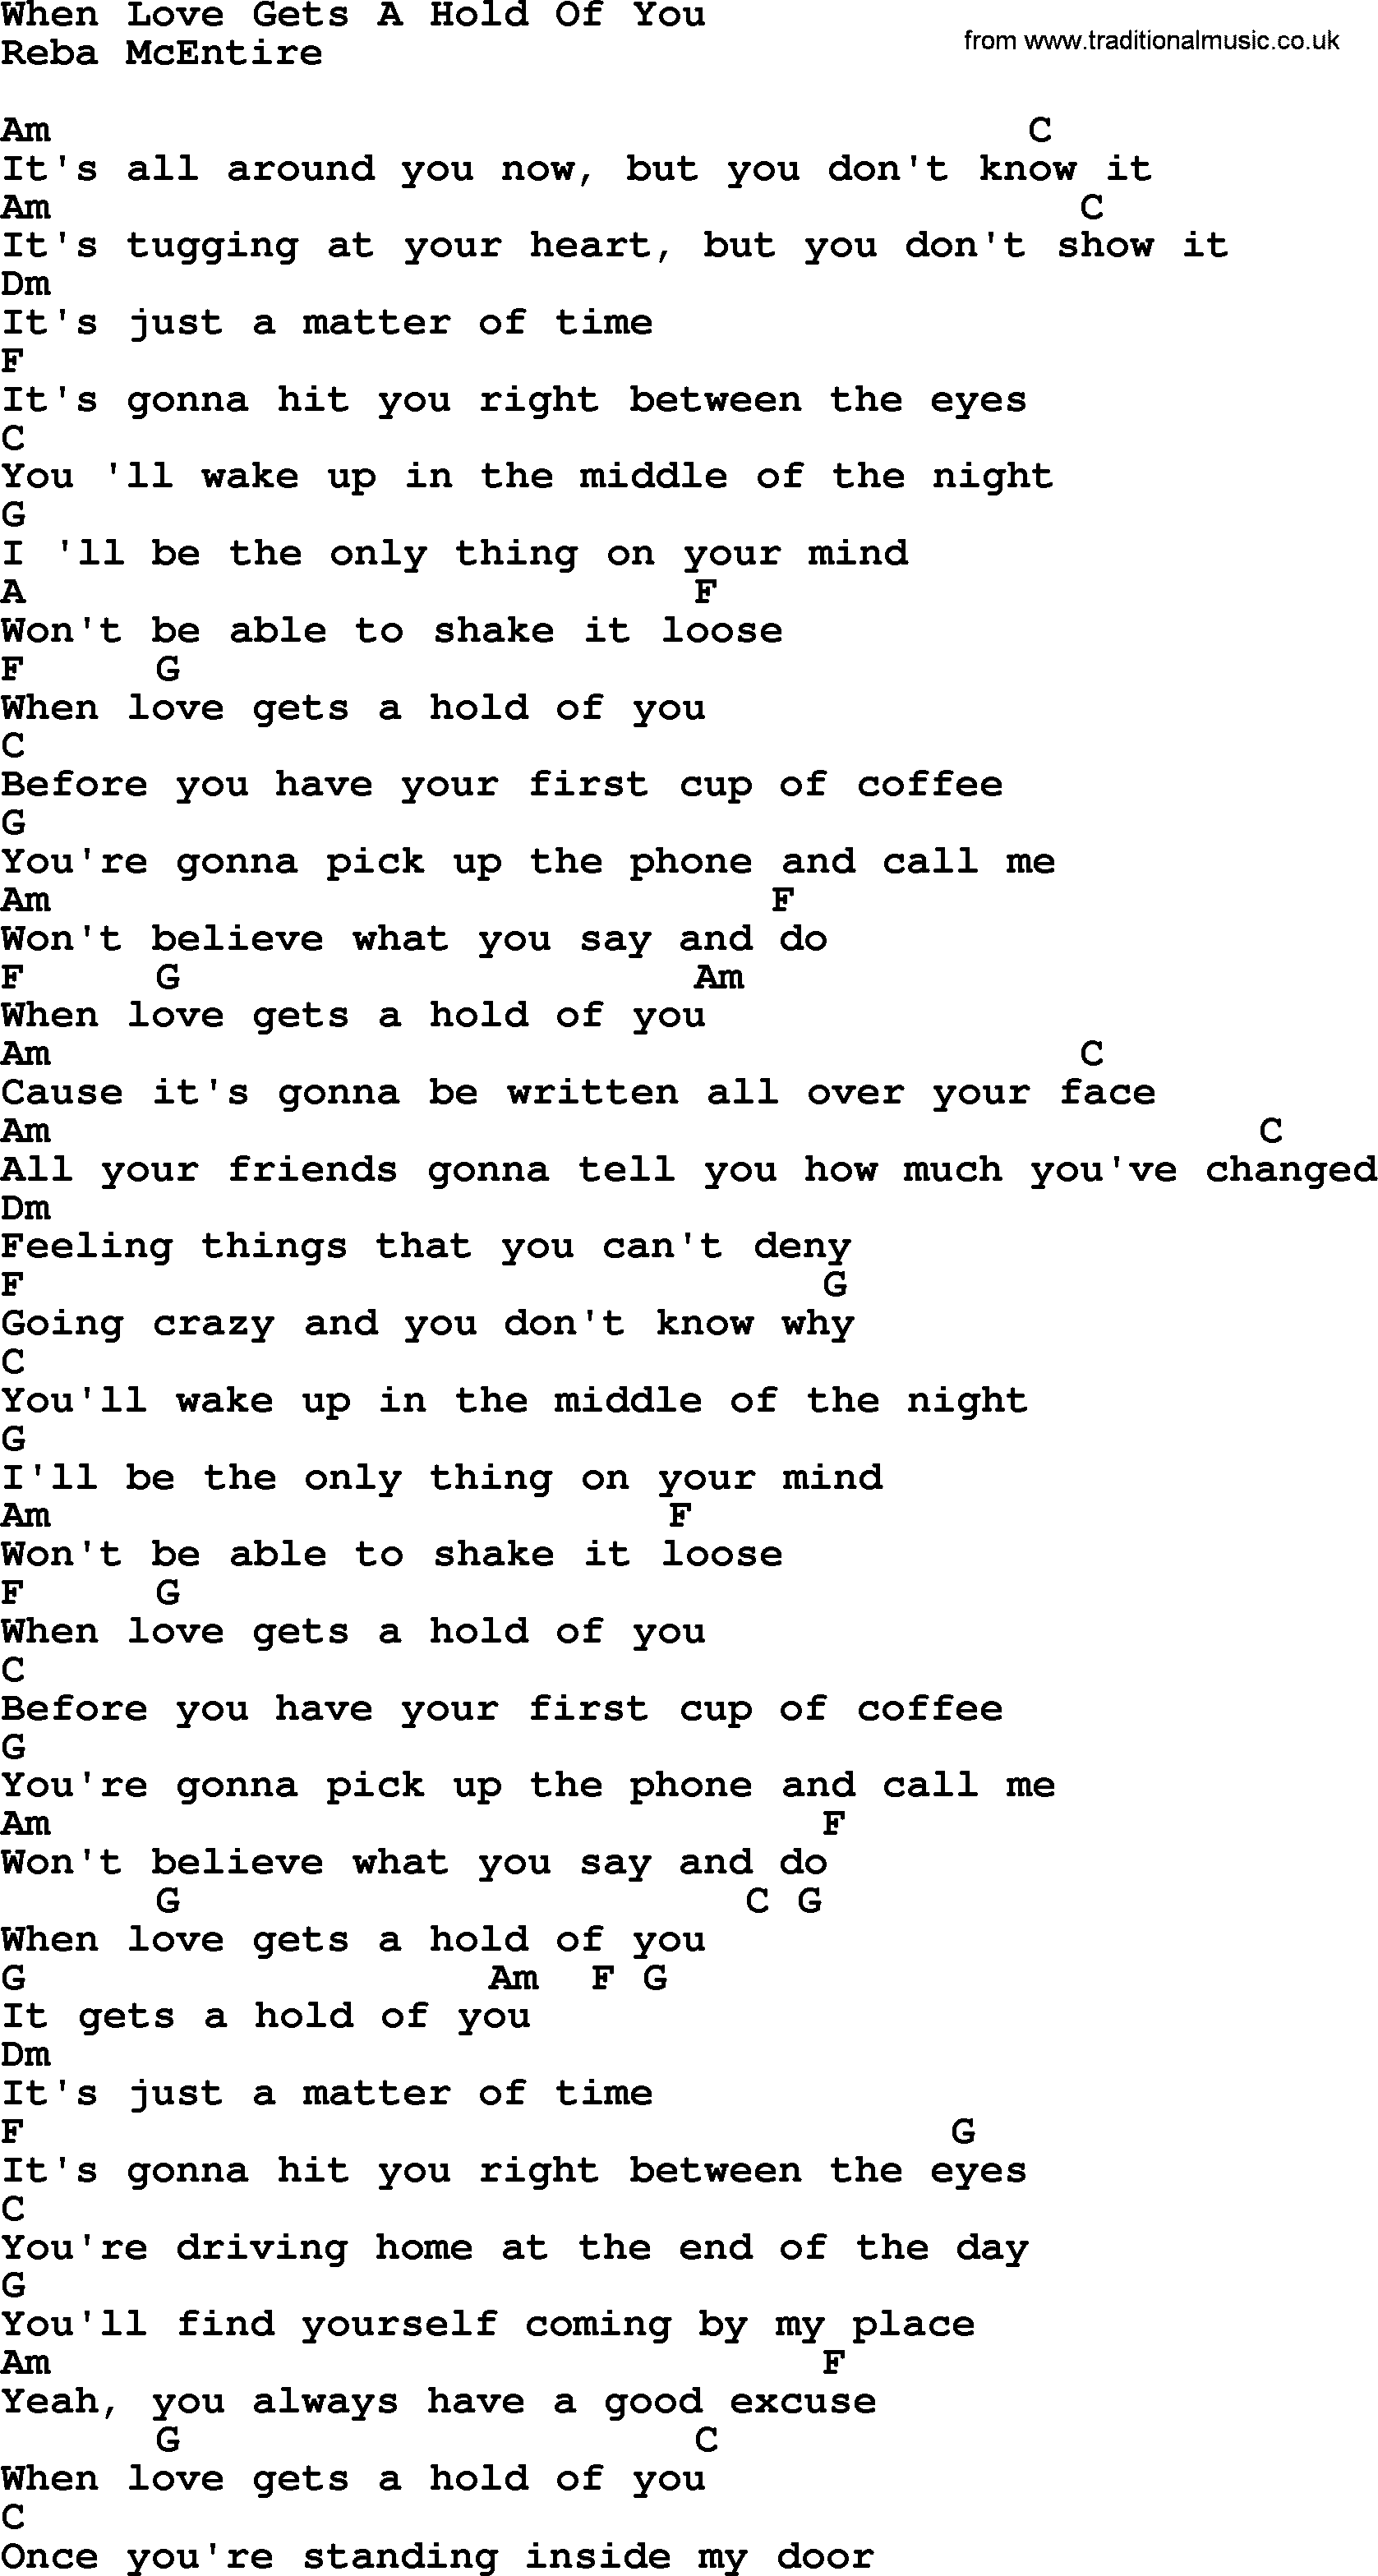 Reba McEntire song: When Love Gets A Hold Of You, lyrics and chords